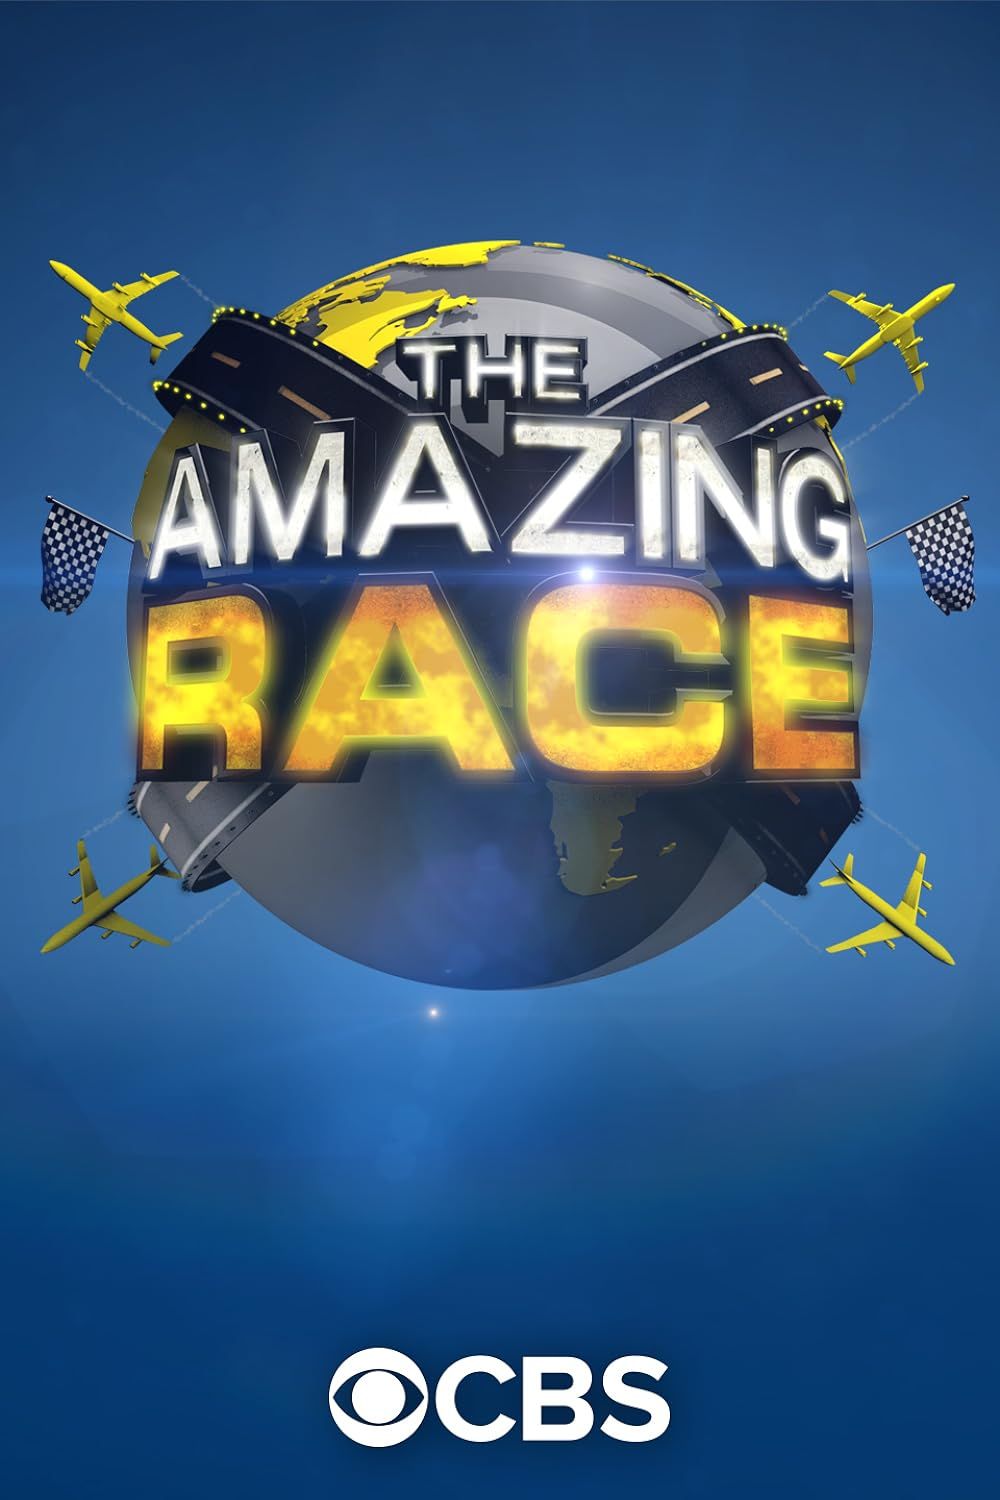 Roads and Planes circle a globe on the Amazing Race Promo